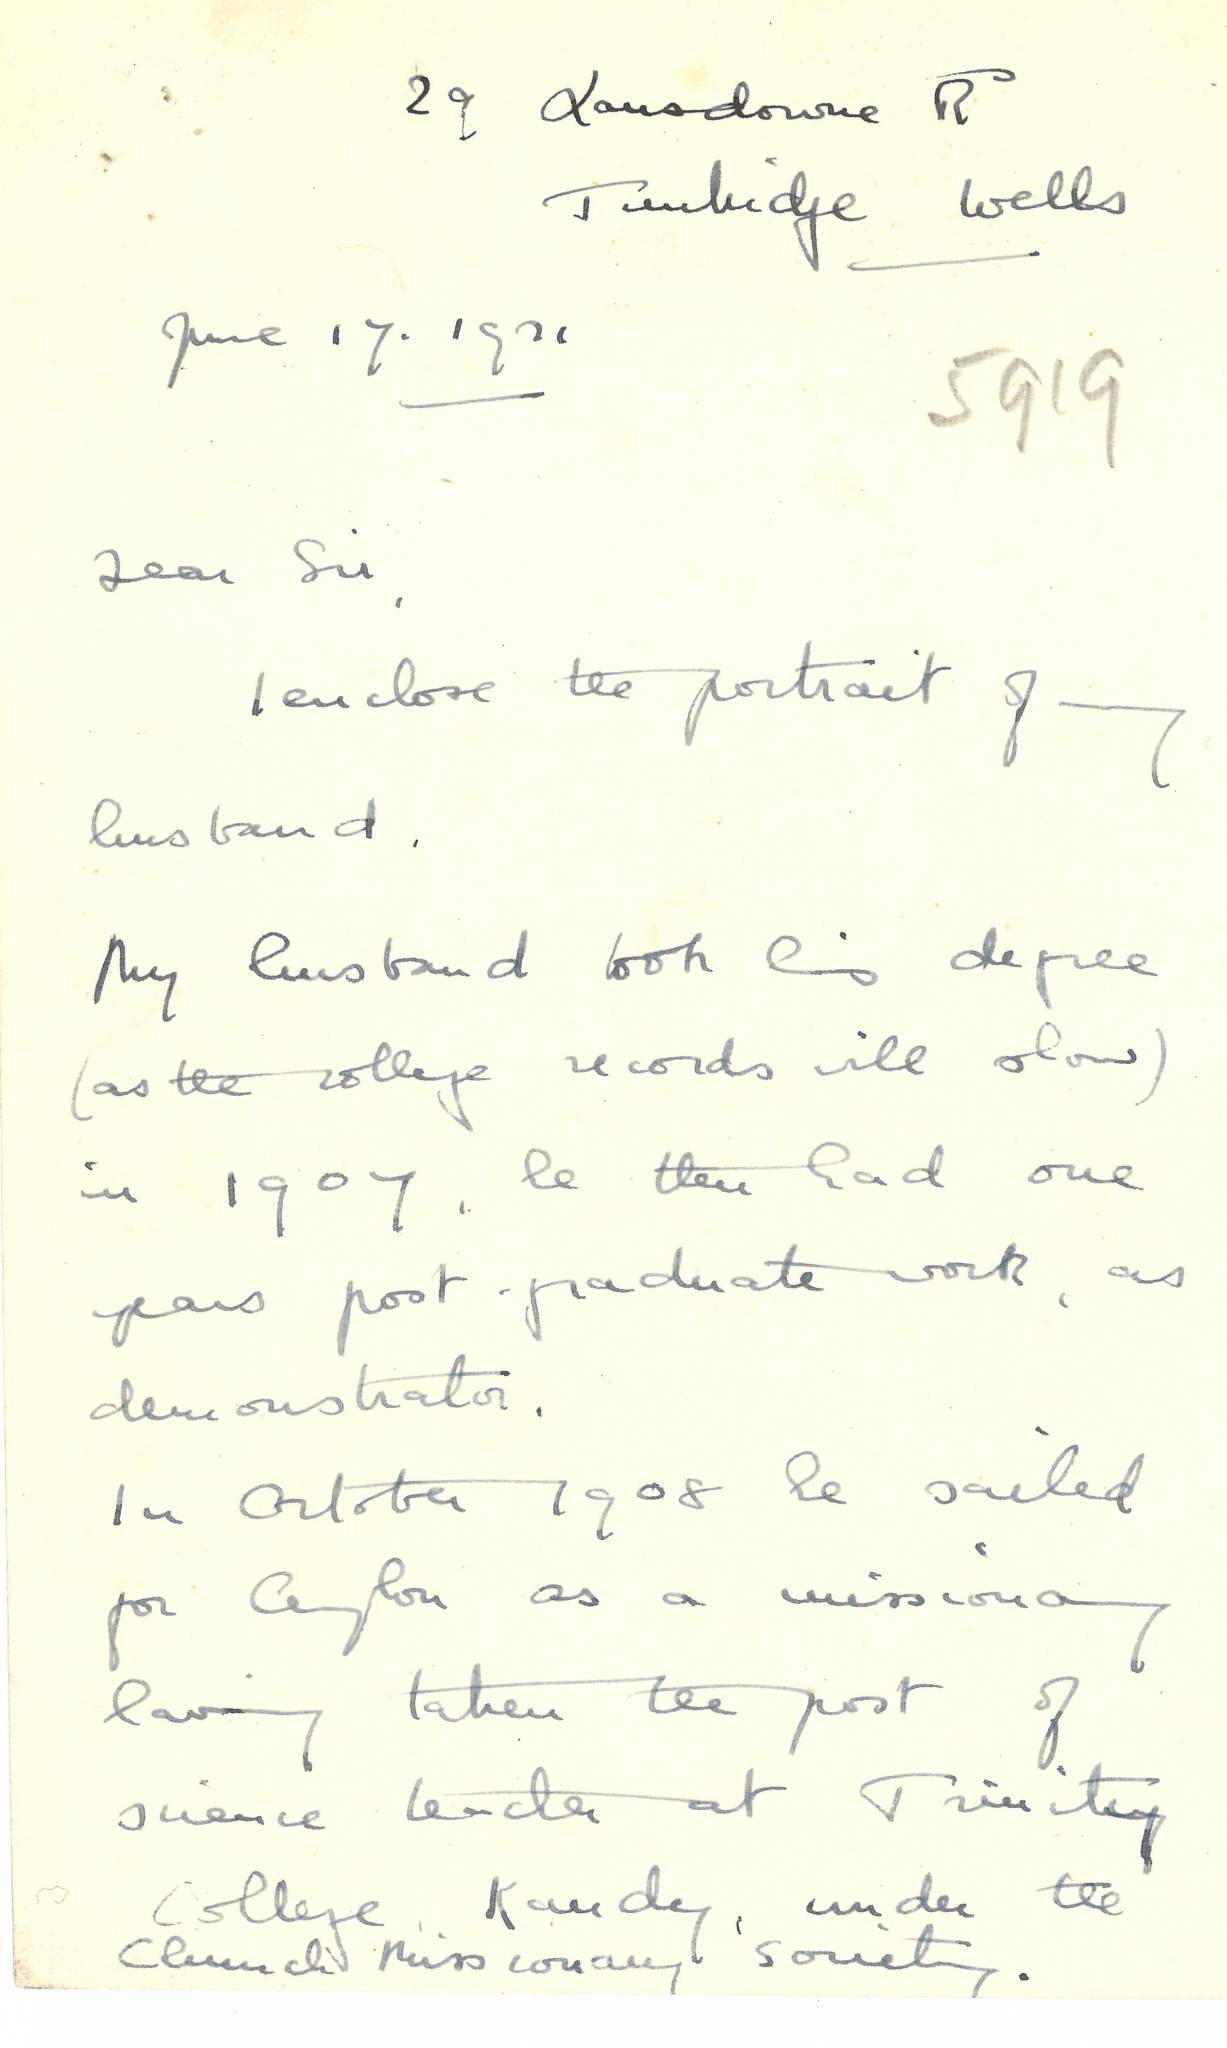 Campbell NP Second Widow Letter 1